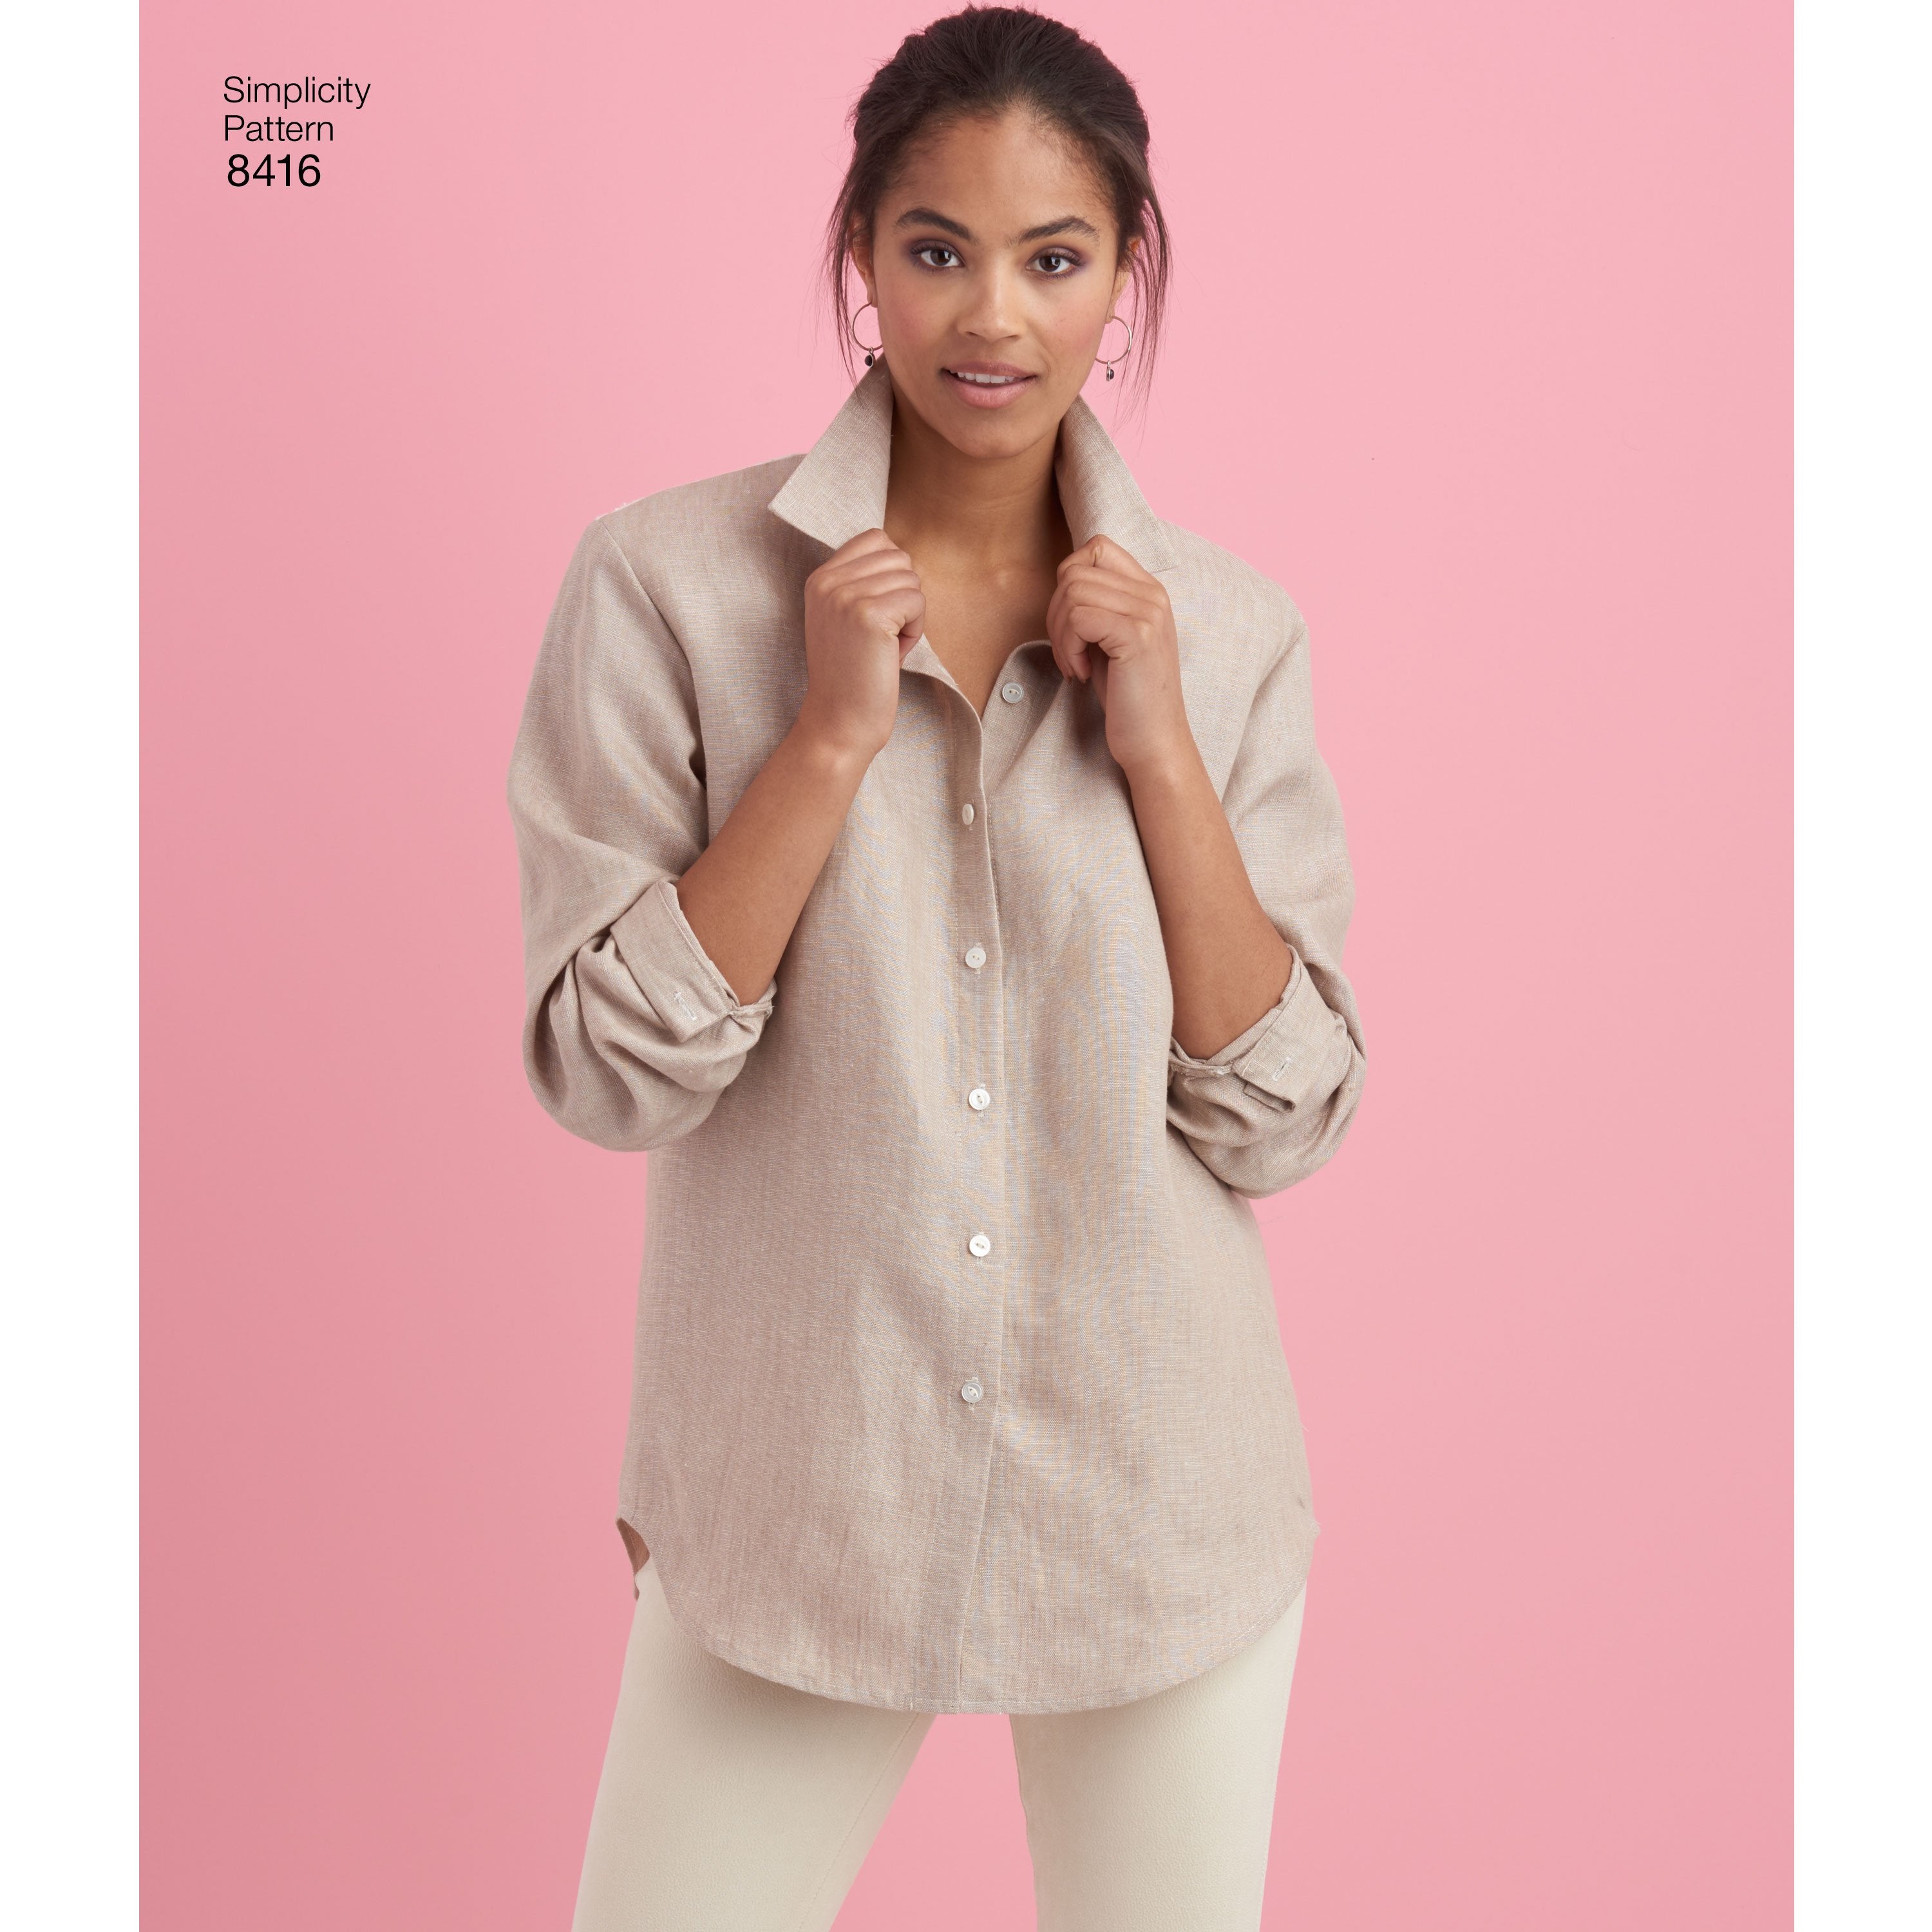 Simplicity Pattern 8416 misses shirt with back variations from Jaycotts Sewing Supplies